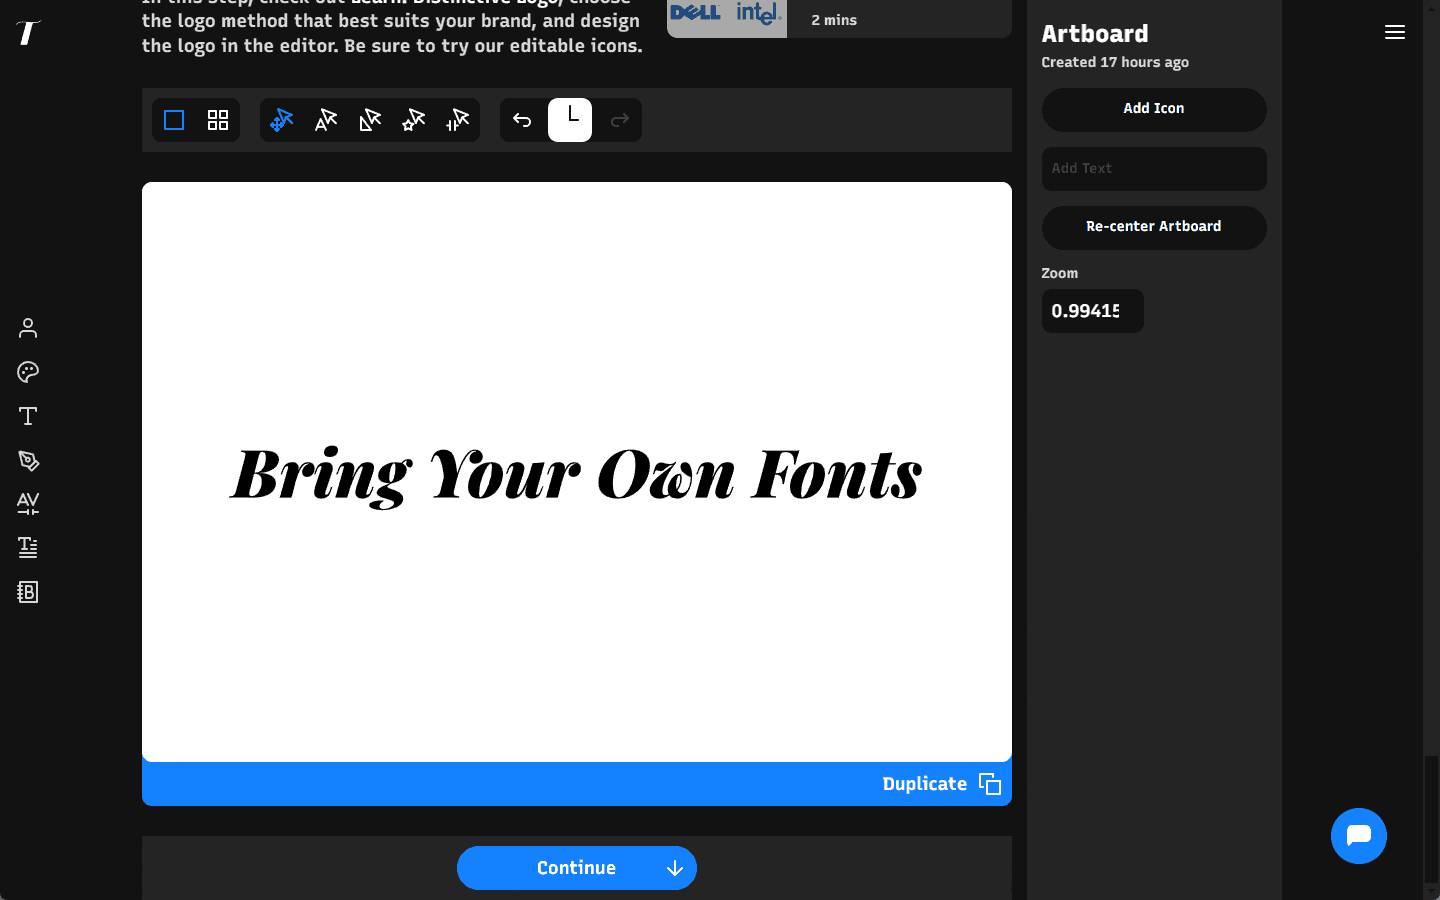 Drag and drop your chosen font file onto any text to apply it instantly on the artboard.